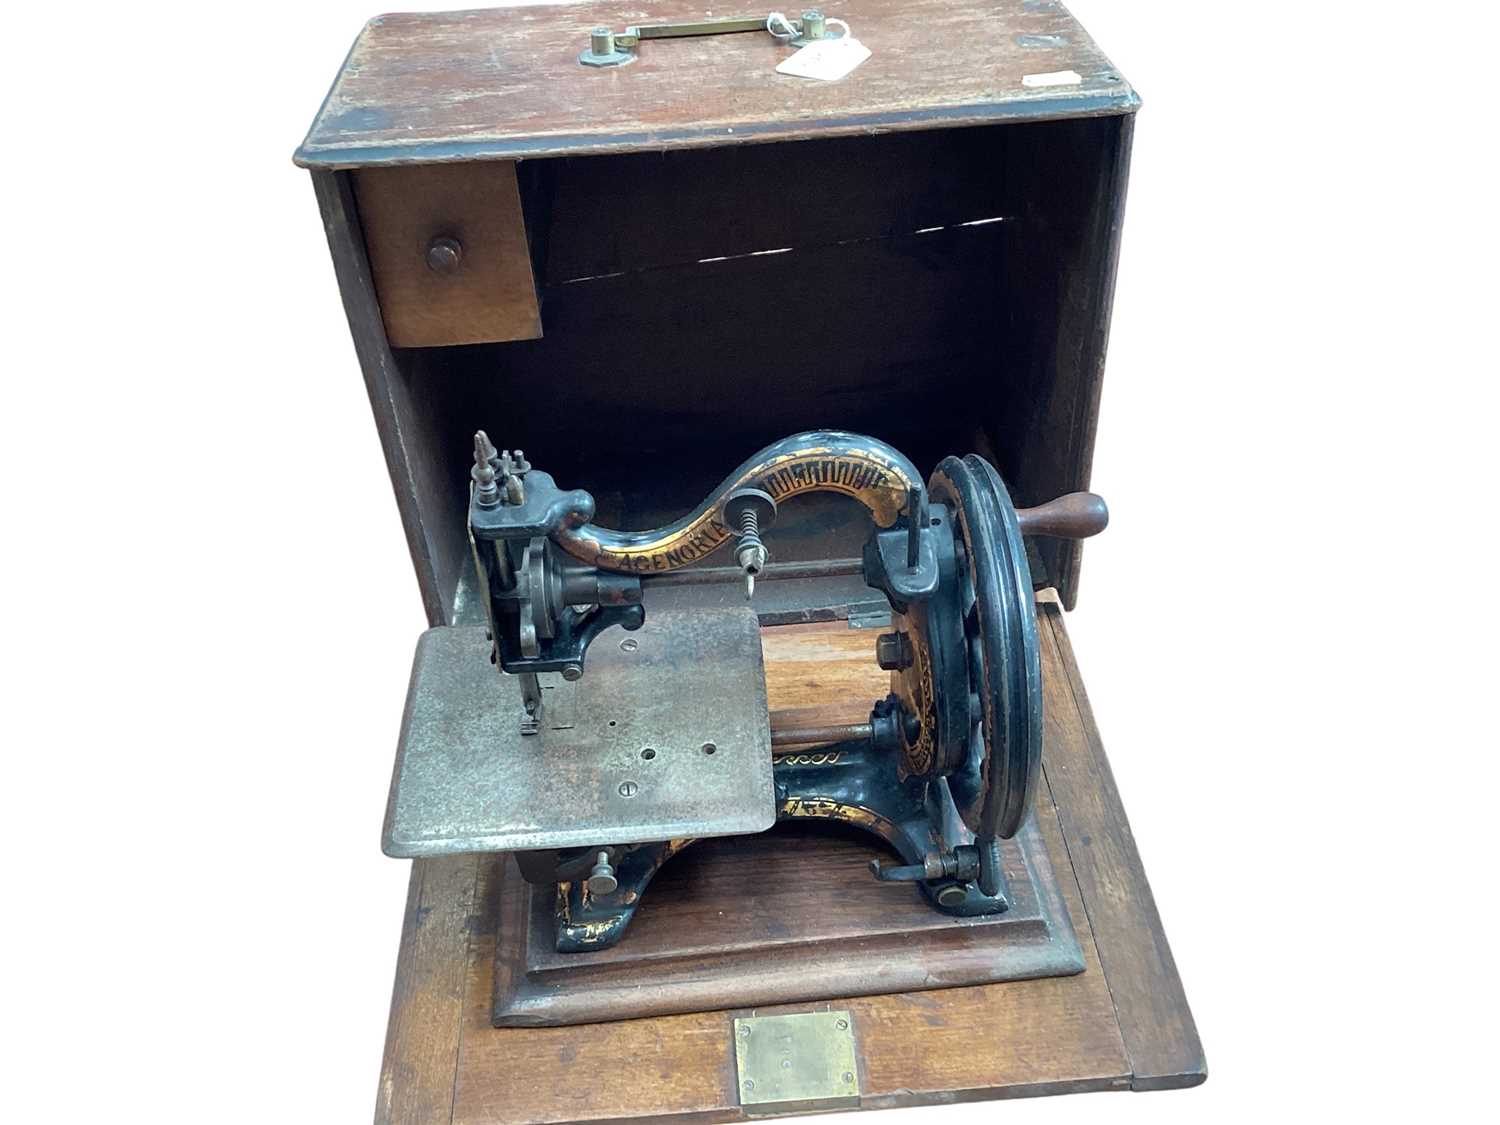 A rare Maxfield 'Agenoria' Works, Birmingham, sewing machine, engraved 'By Appointment to HRH Princ